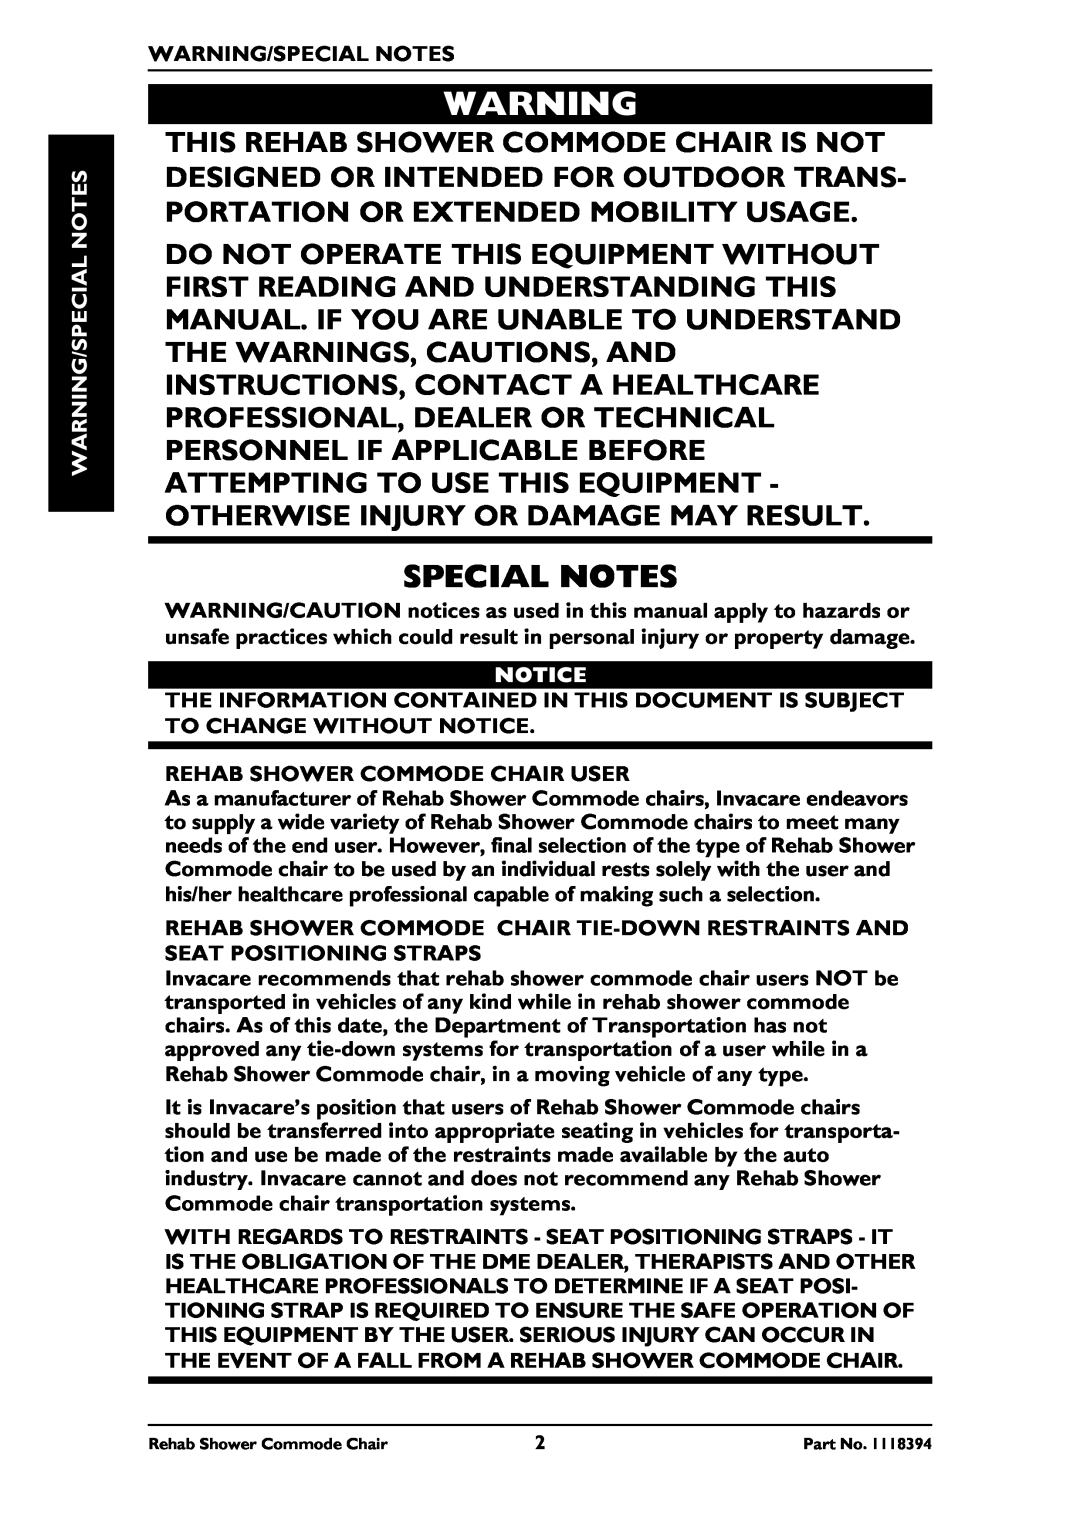 Invacare 6891, 6795, 6895 manual Warning/Special Notes 